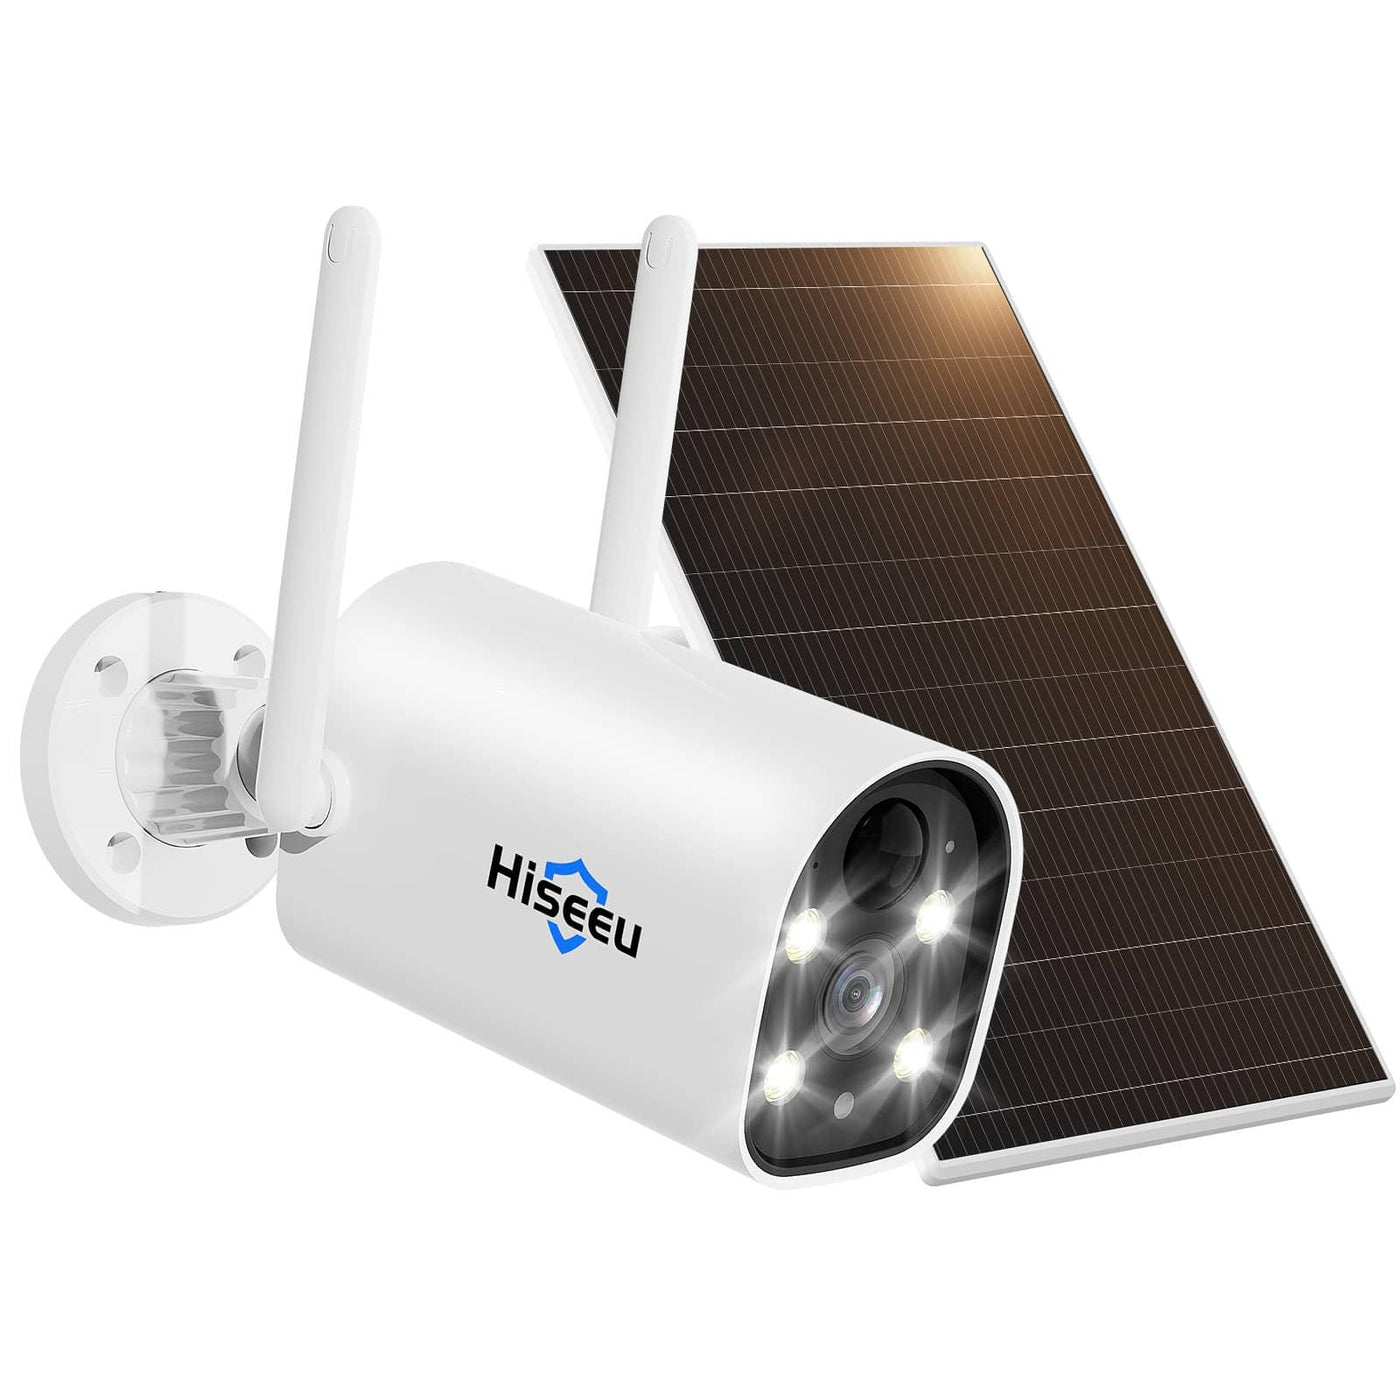 Hiseeu 4MP Rechargeable Solar, Battery Powered 2.5K Security Camera Wireless Outdoor, 2 Way Talk, Color Night Vision, Spotlight/Siren Alarm, Motion Detect, SD/Cloud Storage, Work with Alexa - Hiseeu